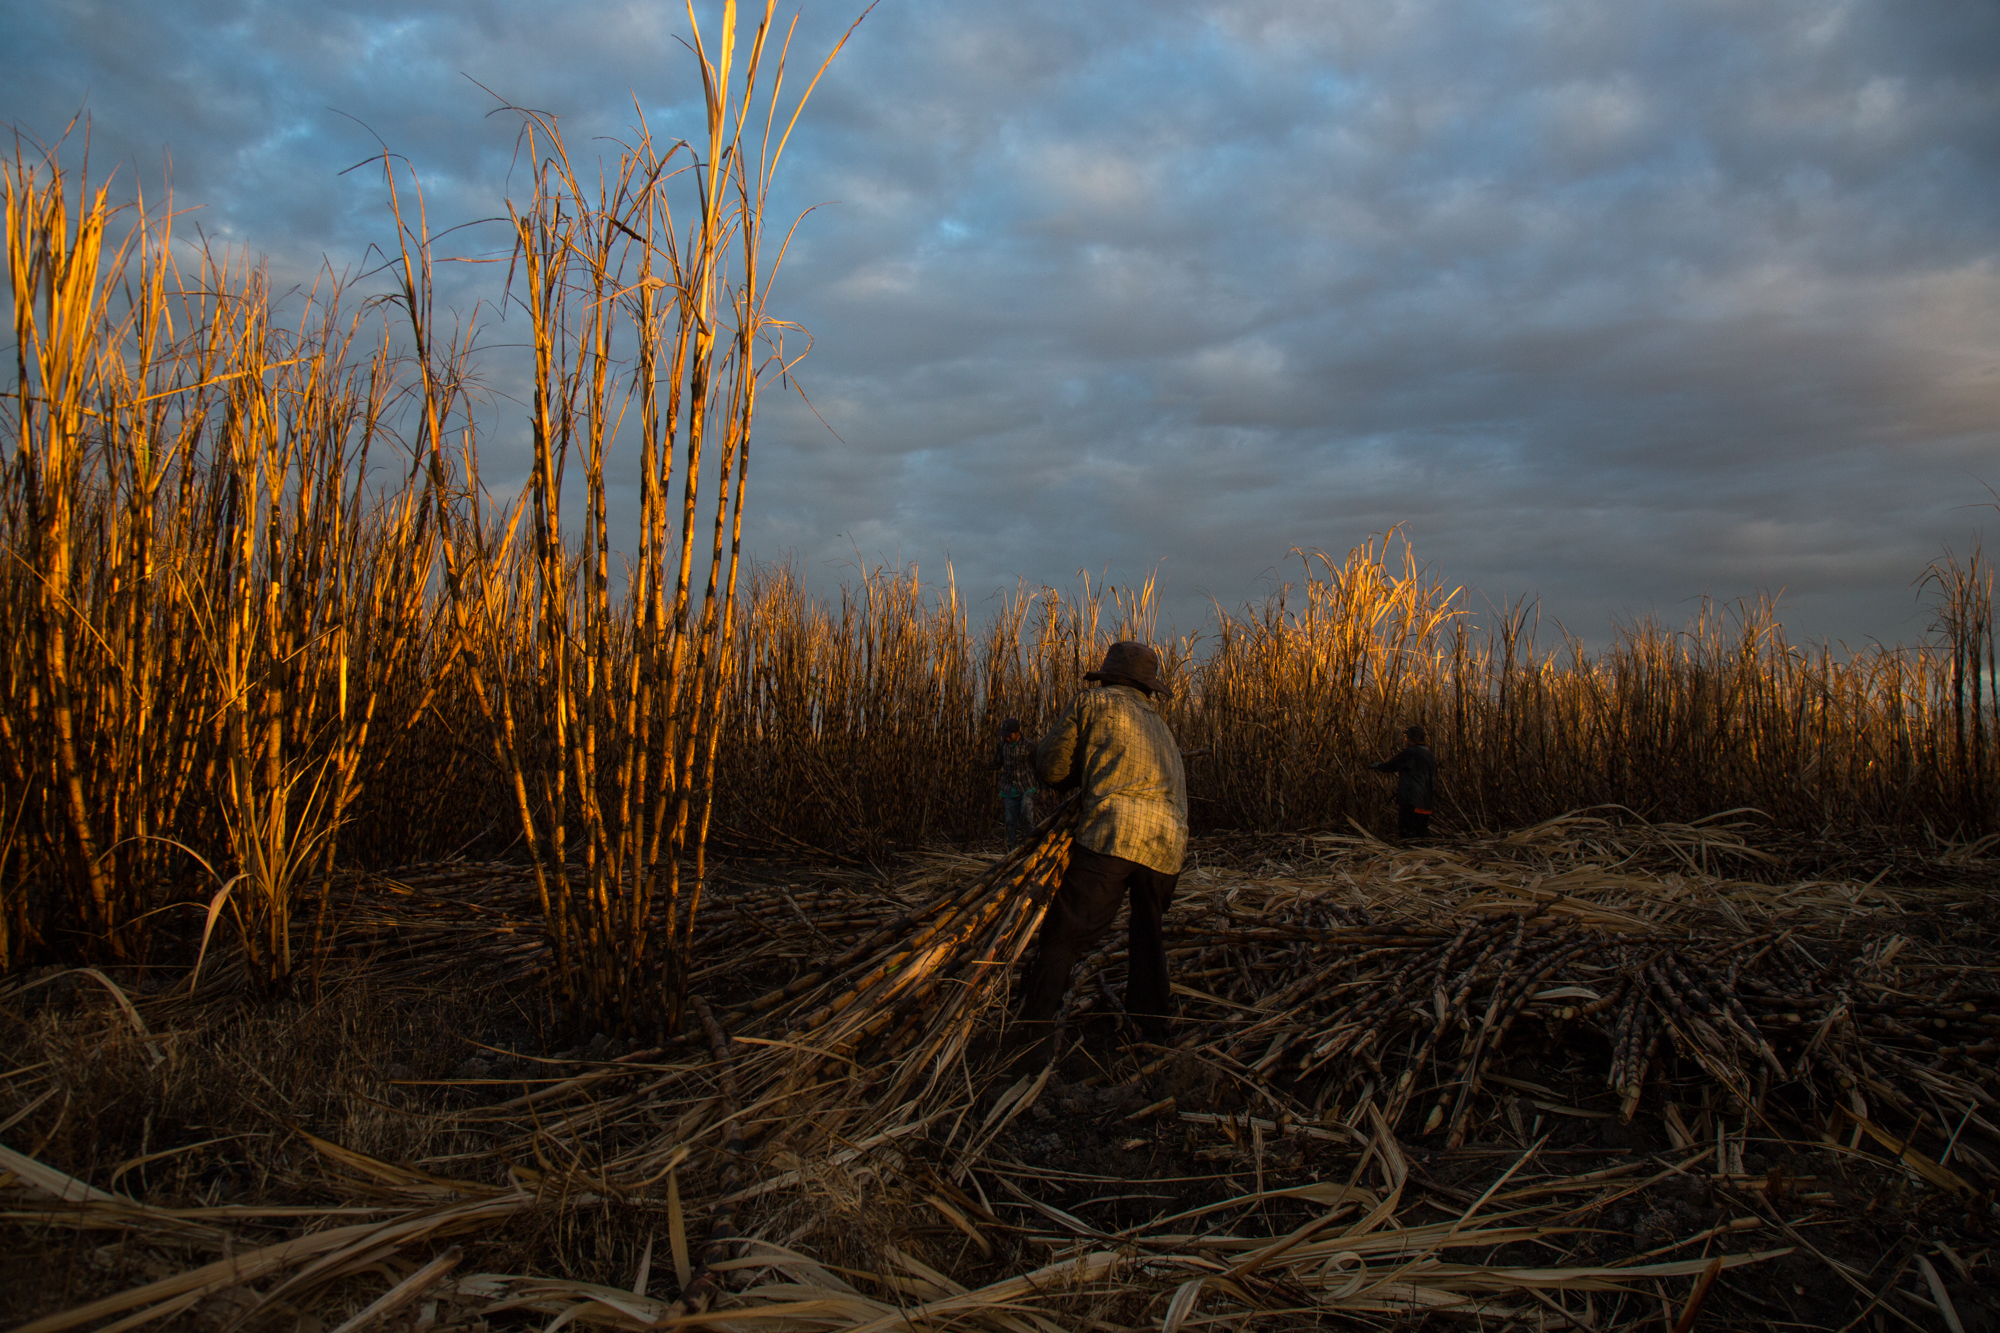  A man drags cut sugarcane in the early morning at the La Carrera plantation near the Bay of Juiquilisco, El Salvador. 